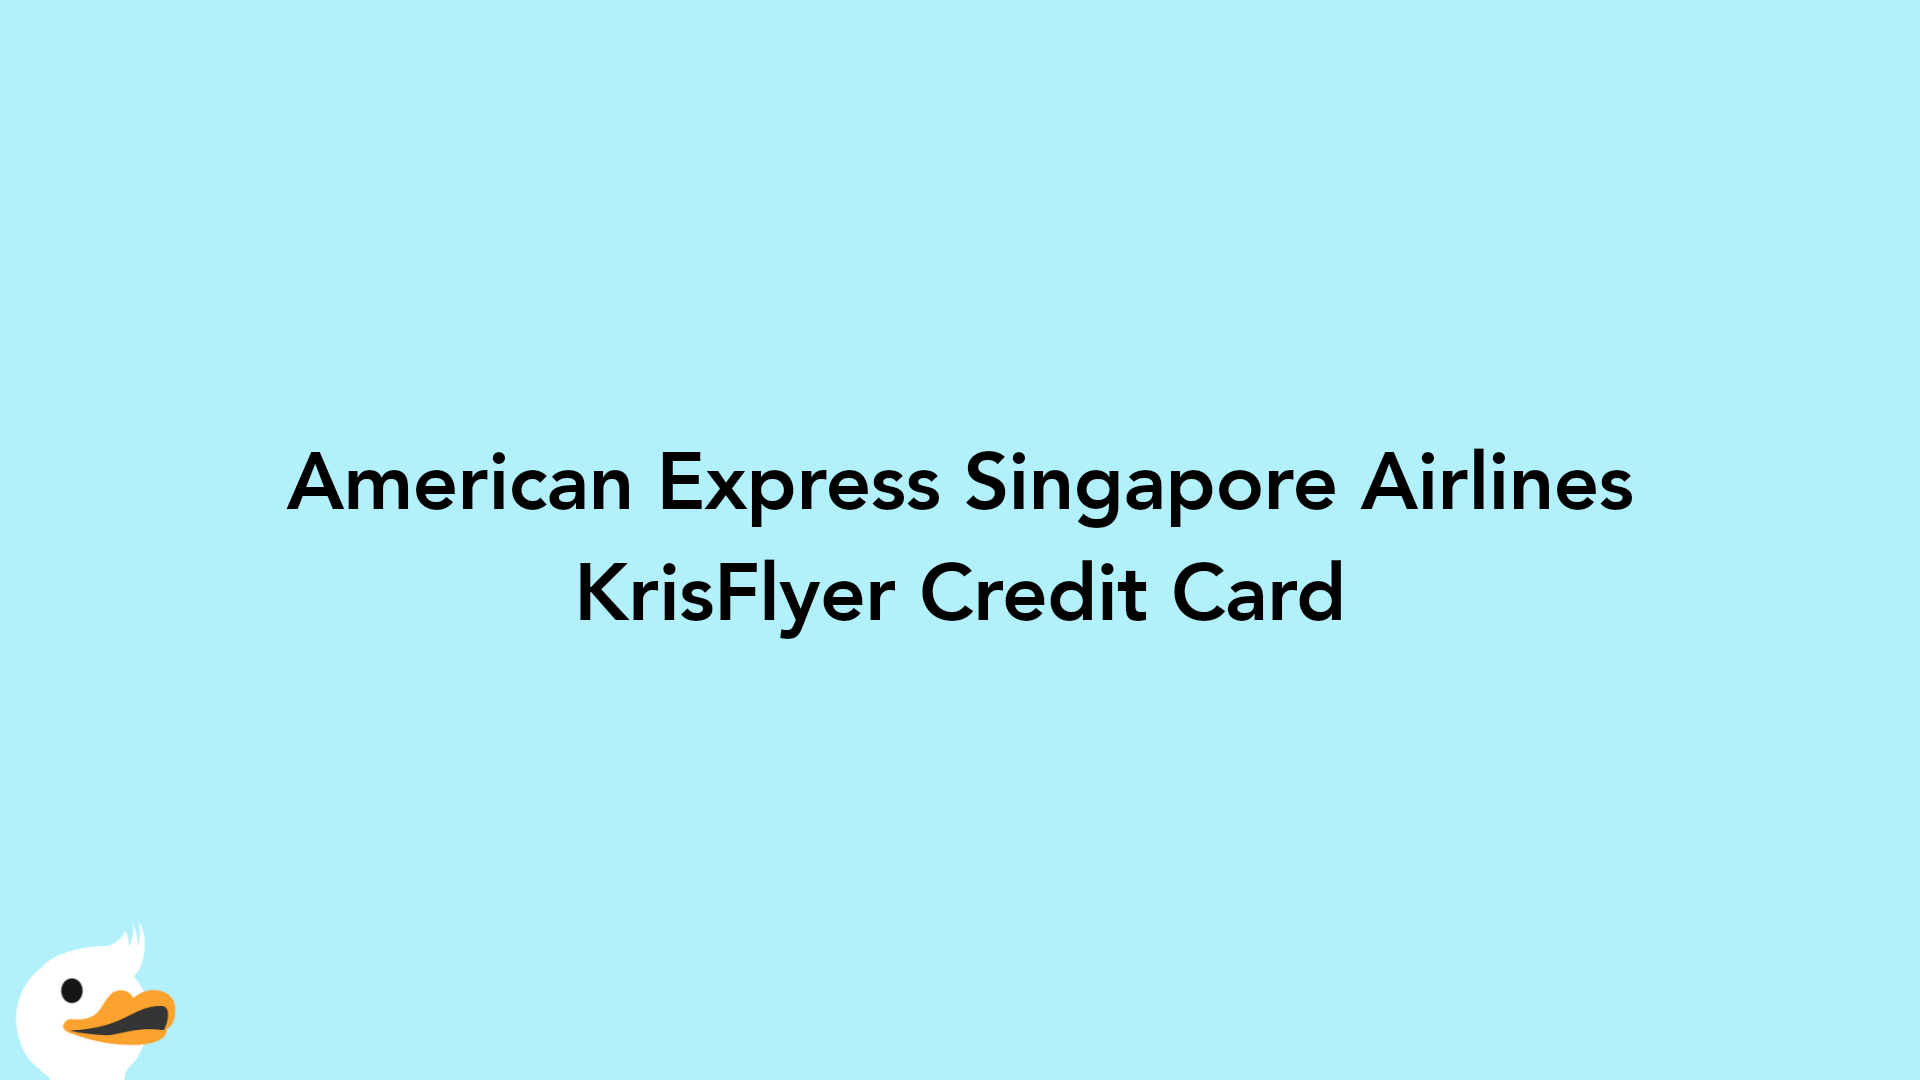 American Express Singapore Airlines KrisFlyer Credit Card